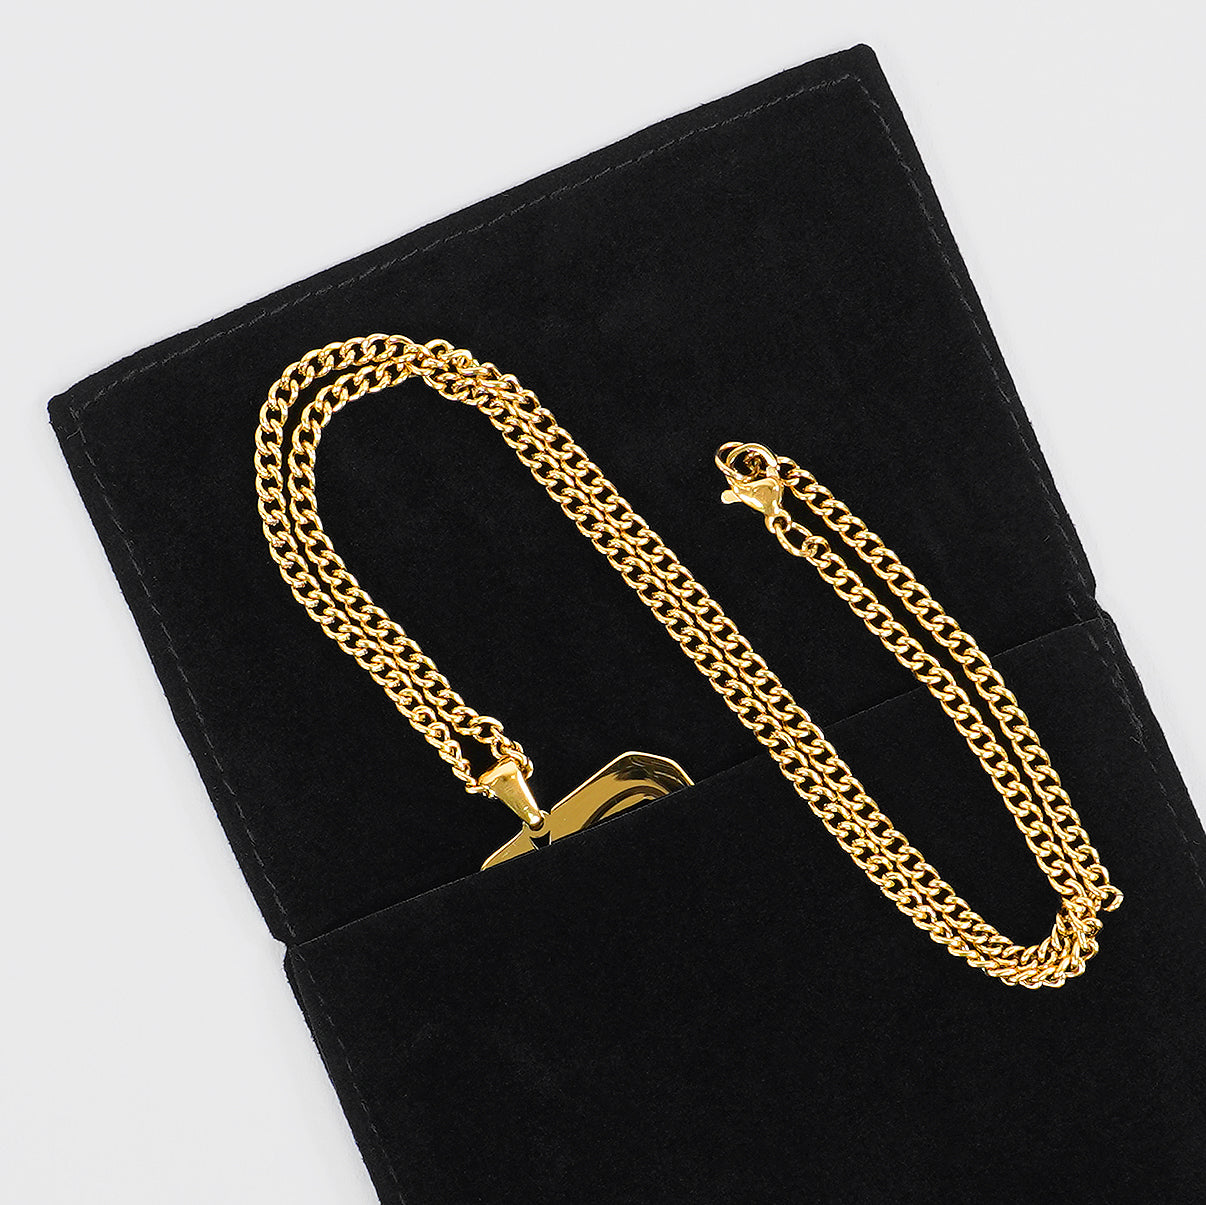 42 Number Pendant with Chain Necklace - Gold Plated Stainless Steel